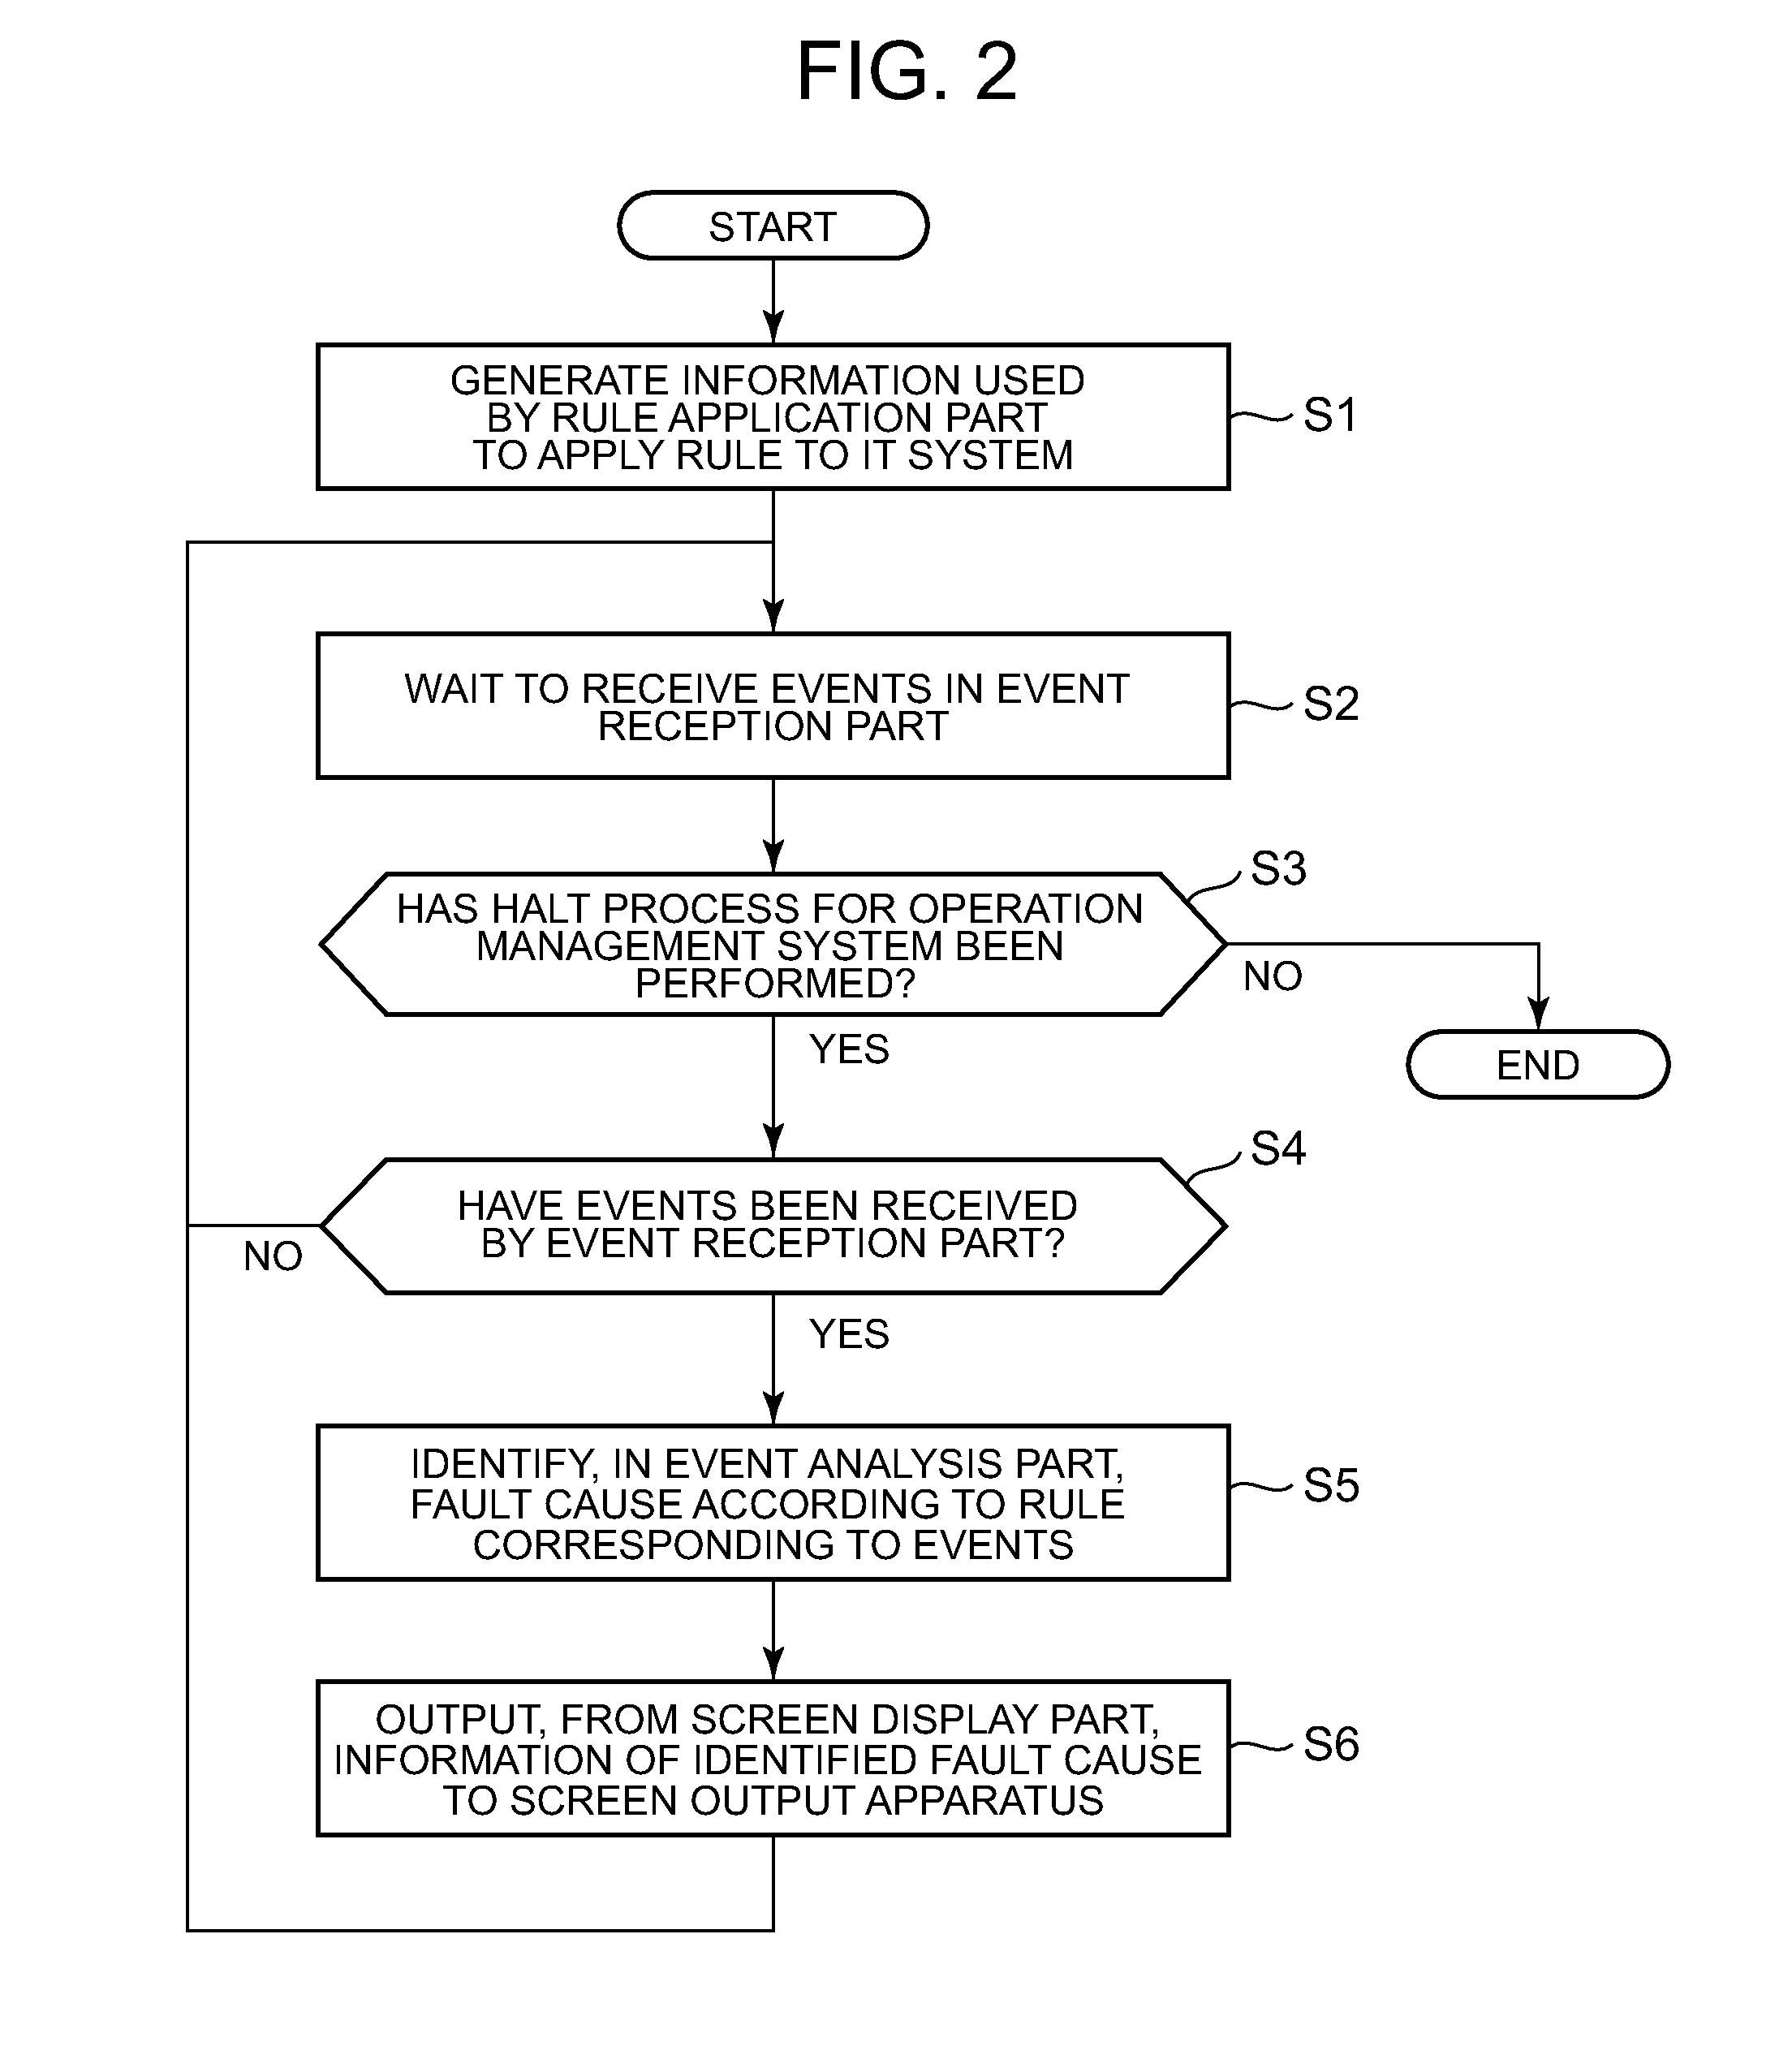 Root cause analysis method, apparatus, and program for it apparatuses from which event information is not obtained